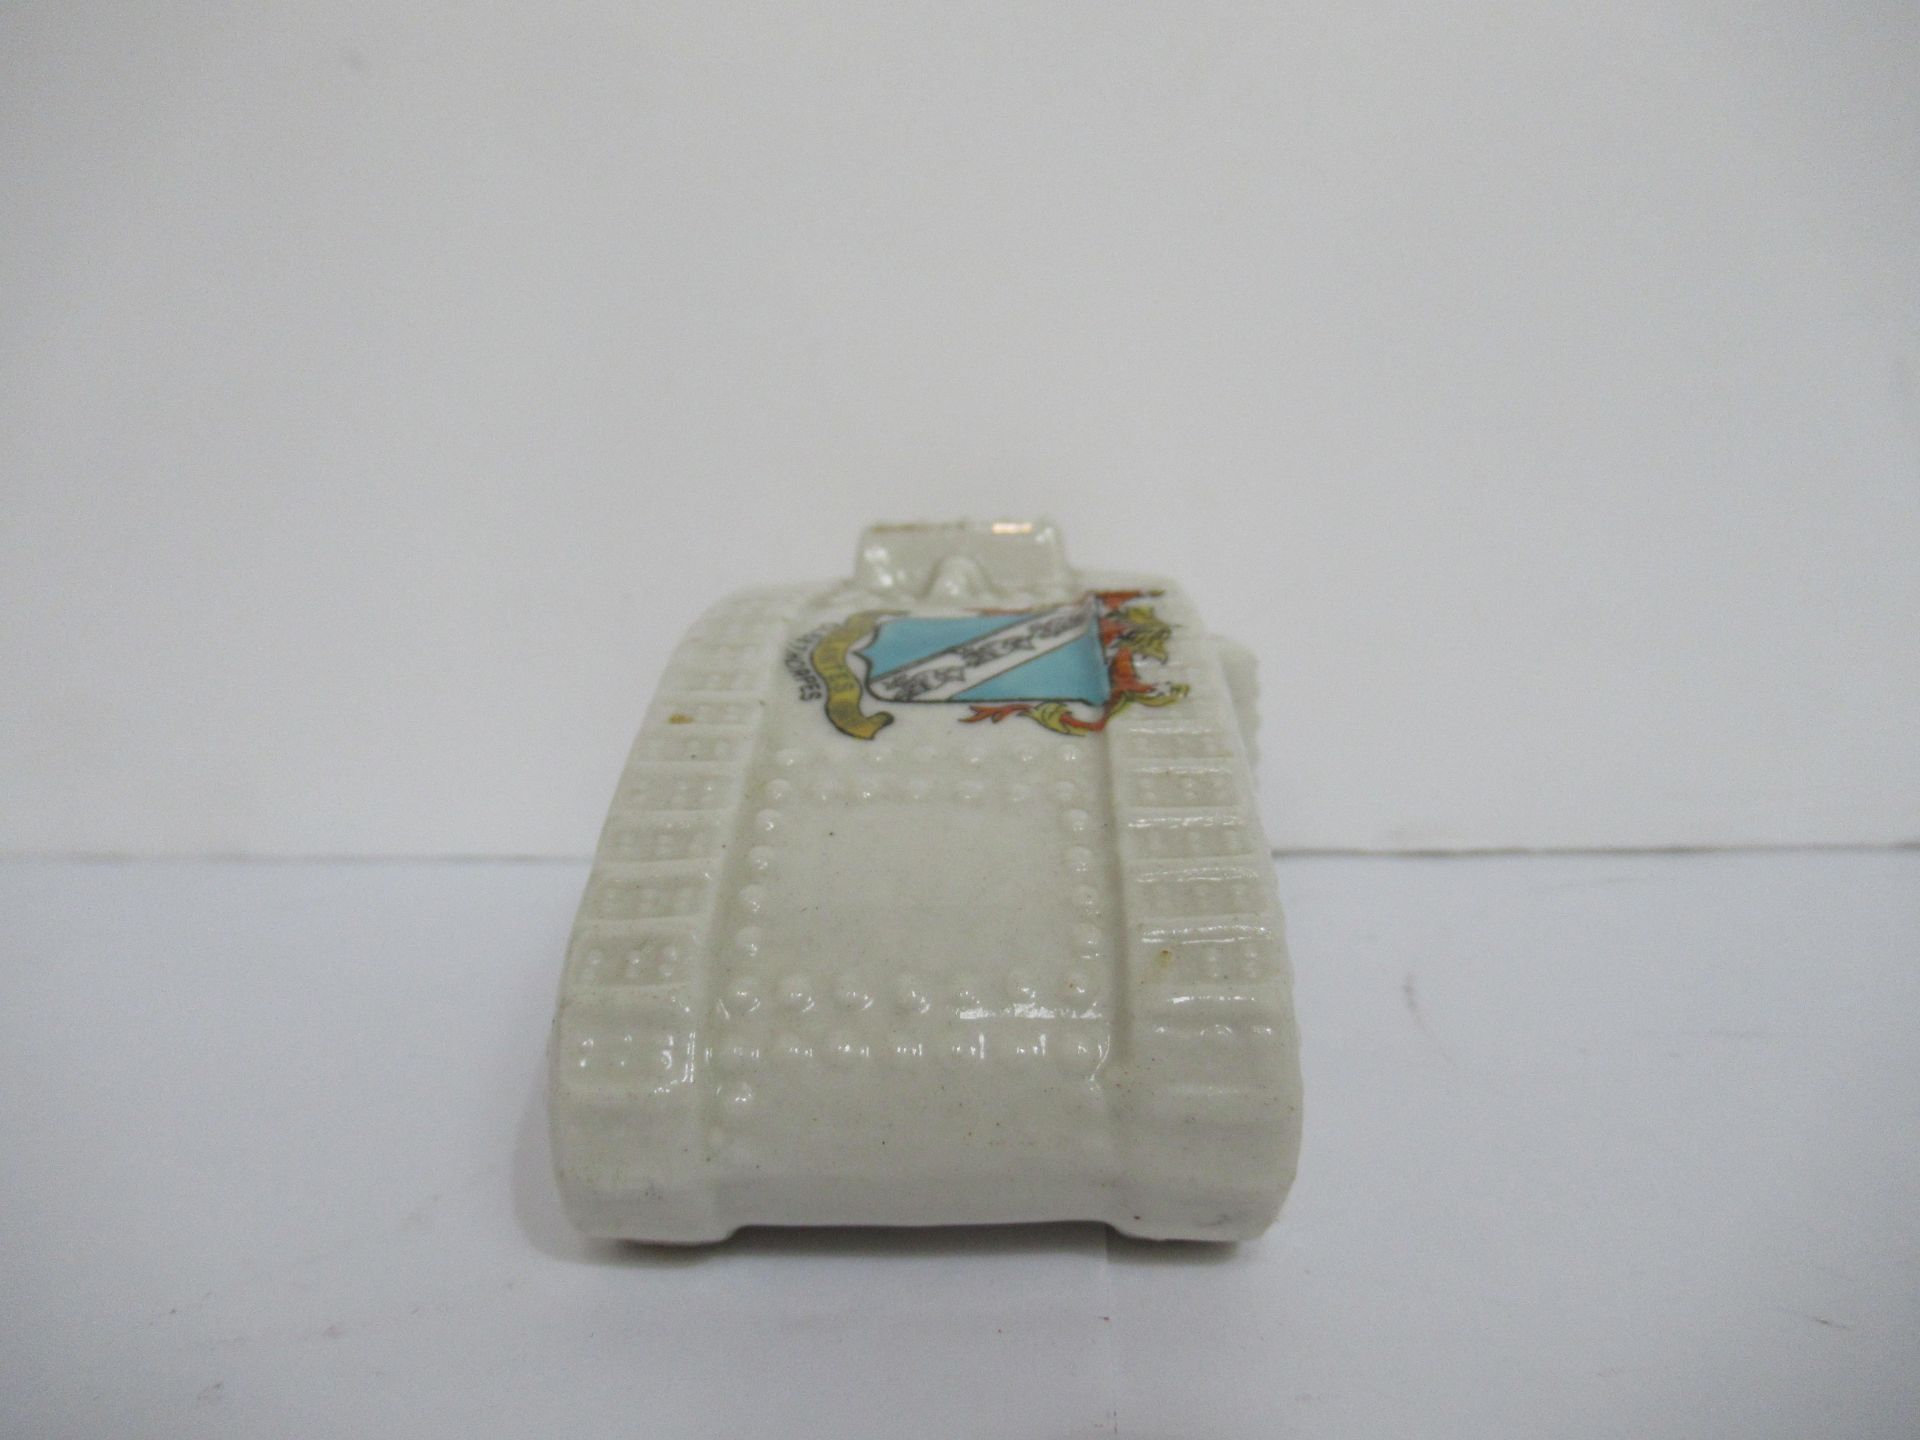 Crested China Arcadian model of tank with Grimsby coat of arms (90mm x 115mm) - Image 14 of 18